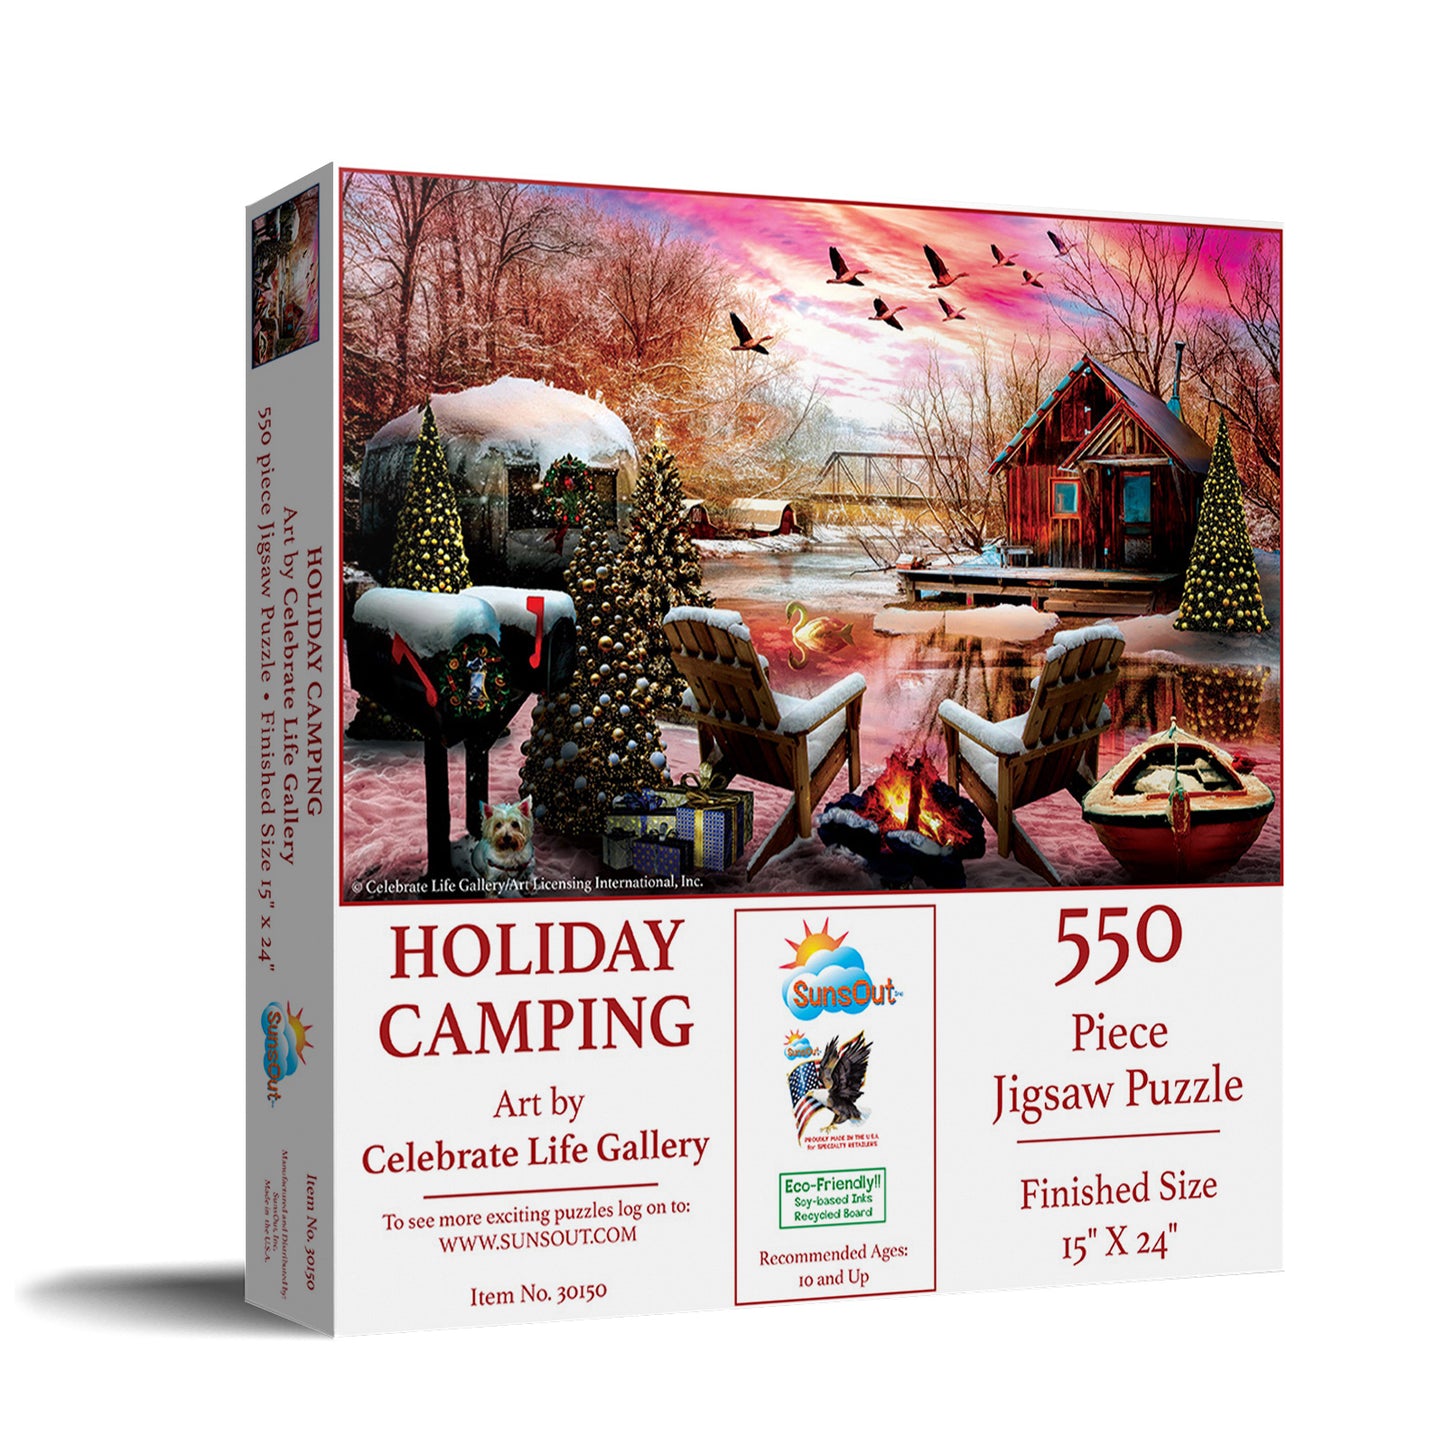 Holiday Camping - 550 Piece Jigsaw Puzzle